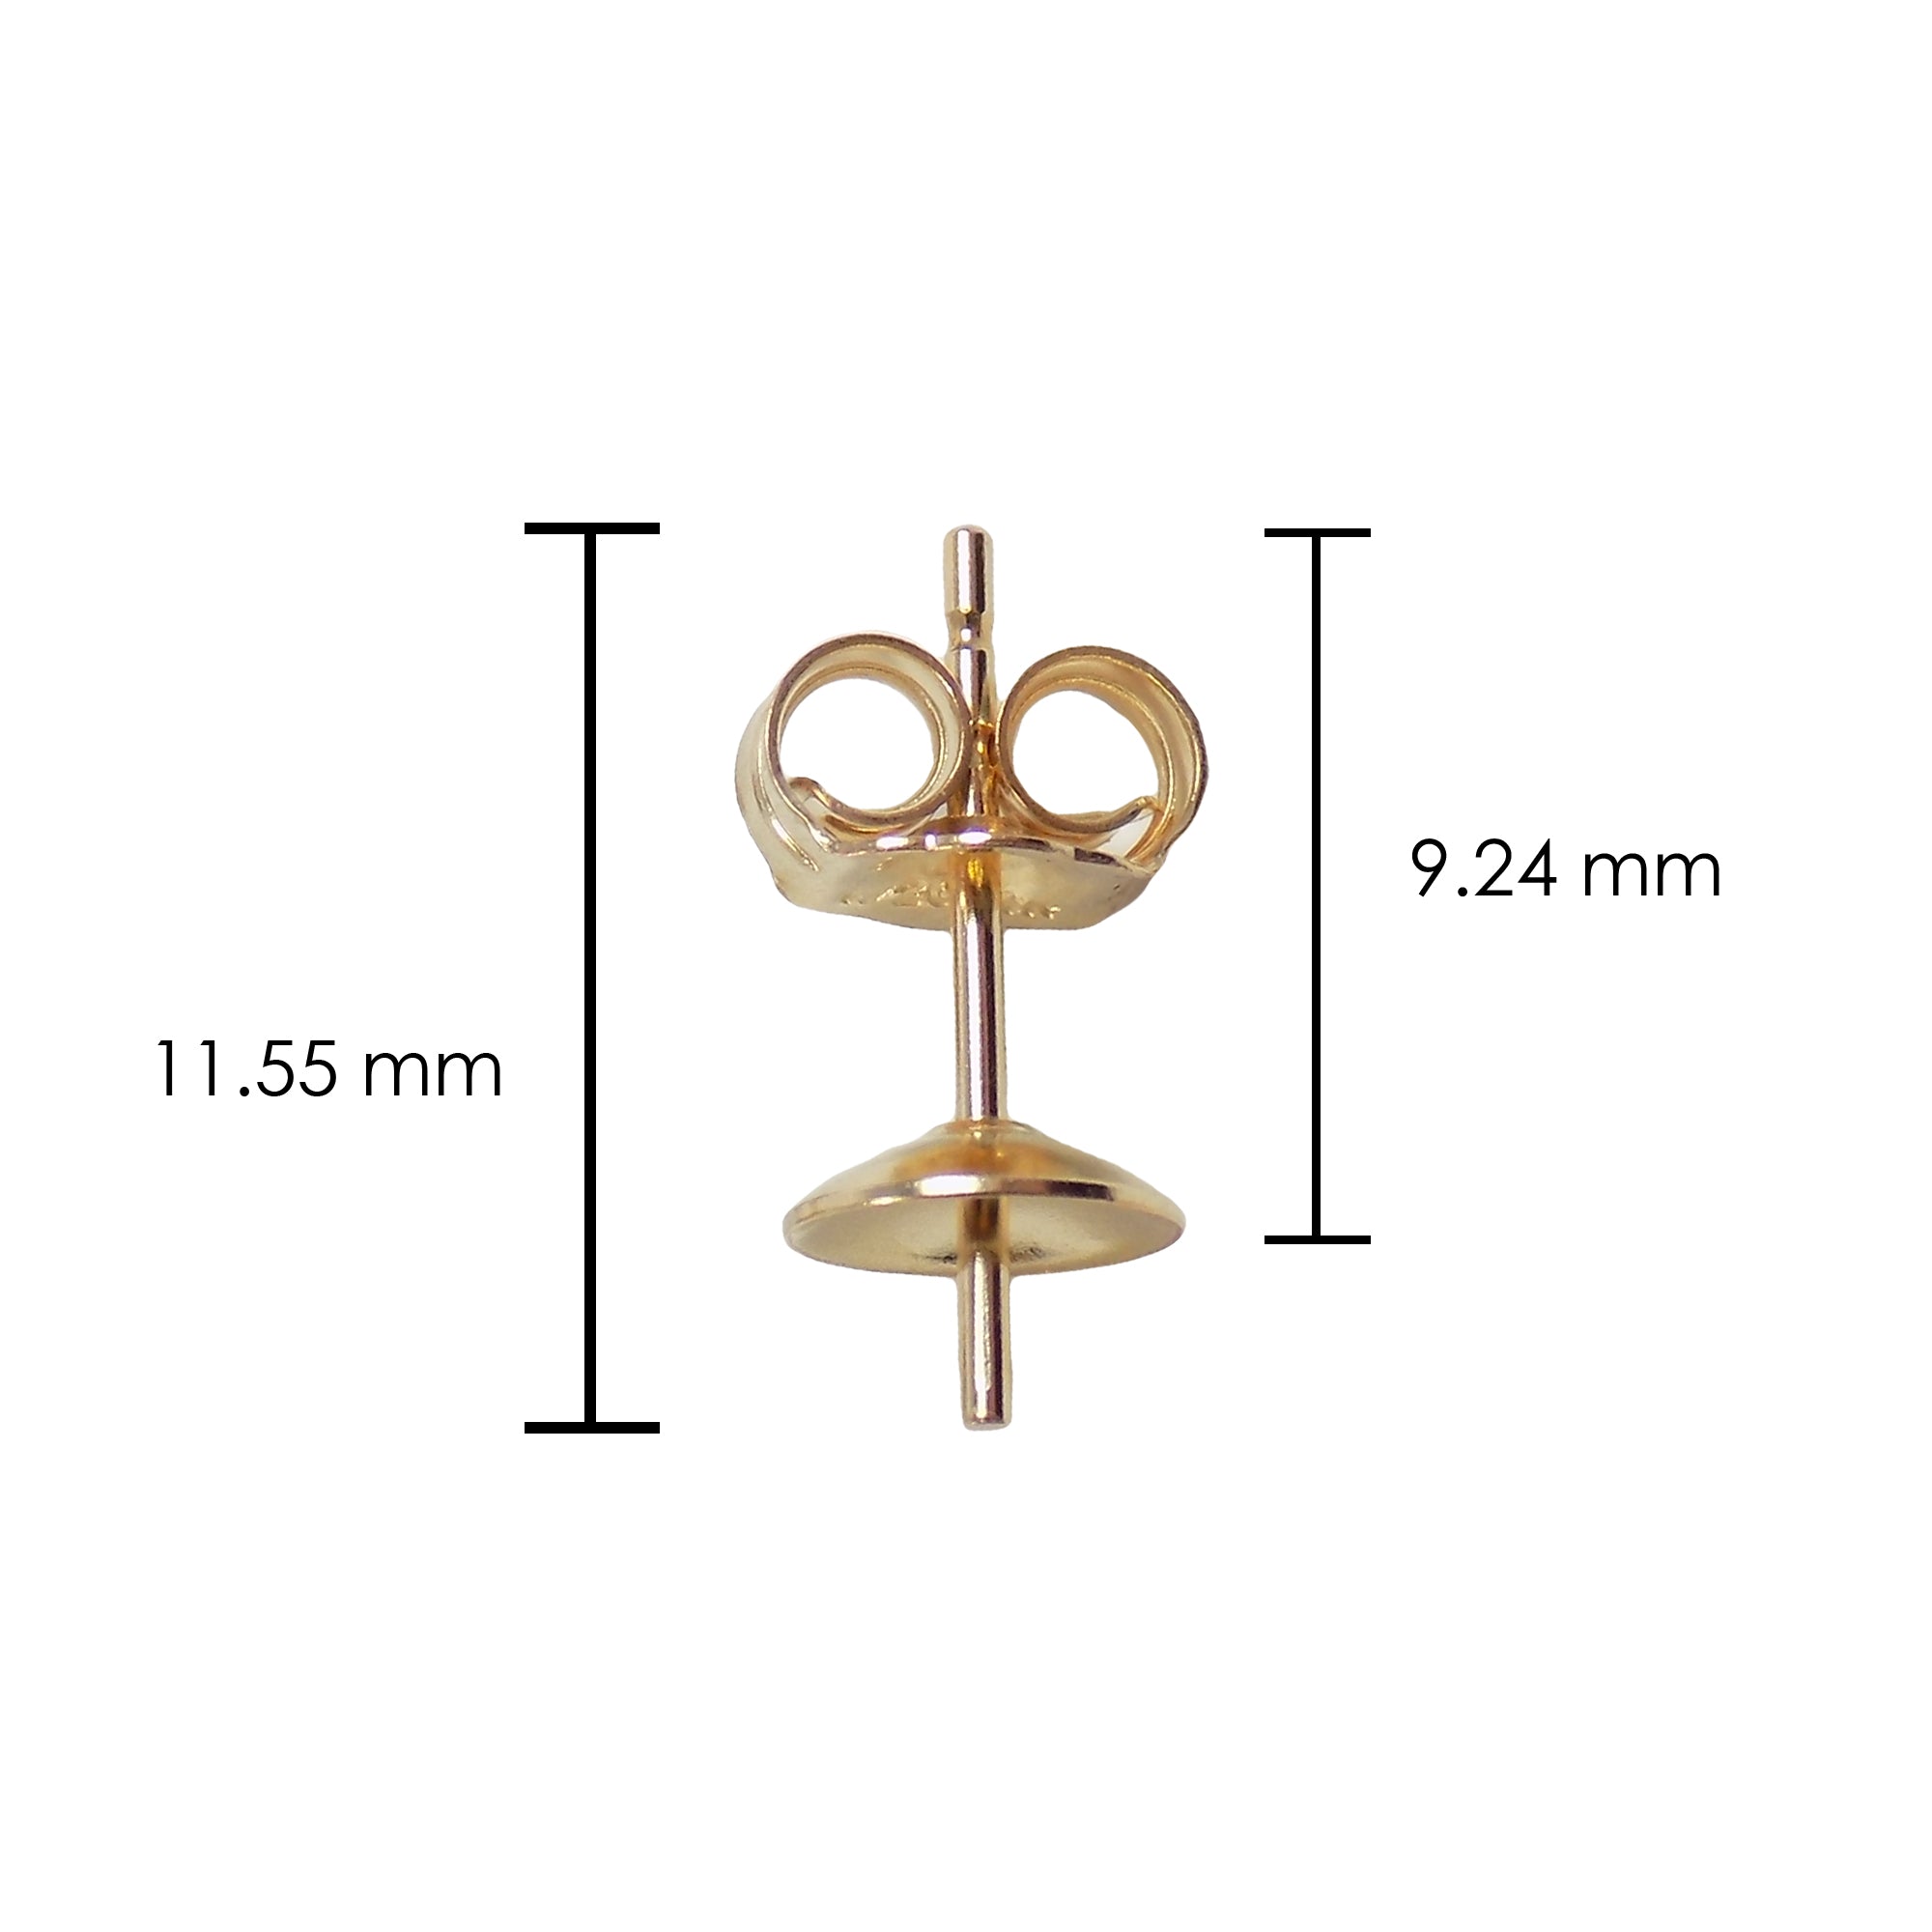 Cup and Earring Back 5.0mm. wholesale earrings supplies